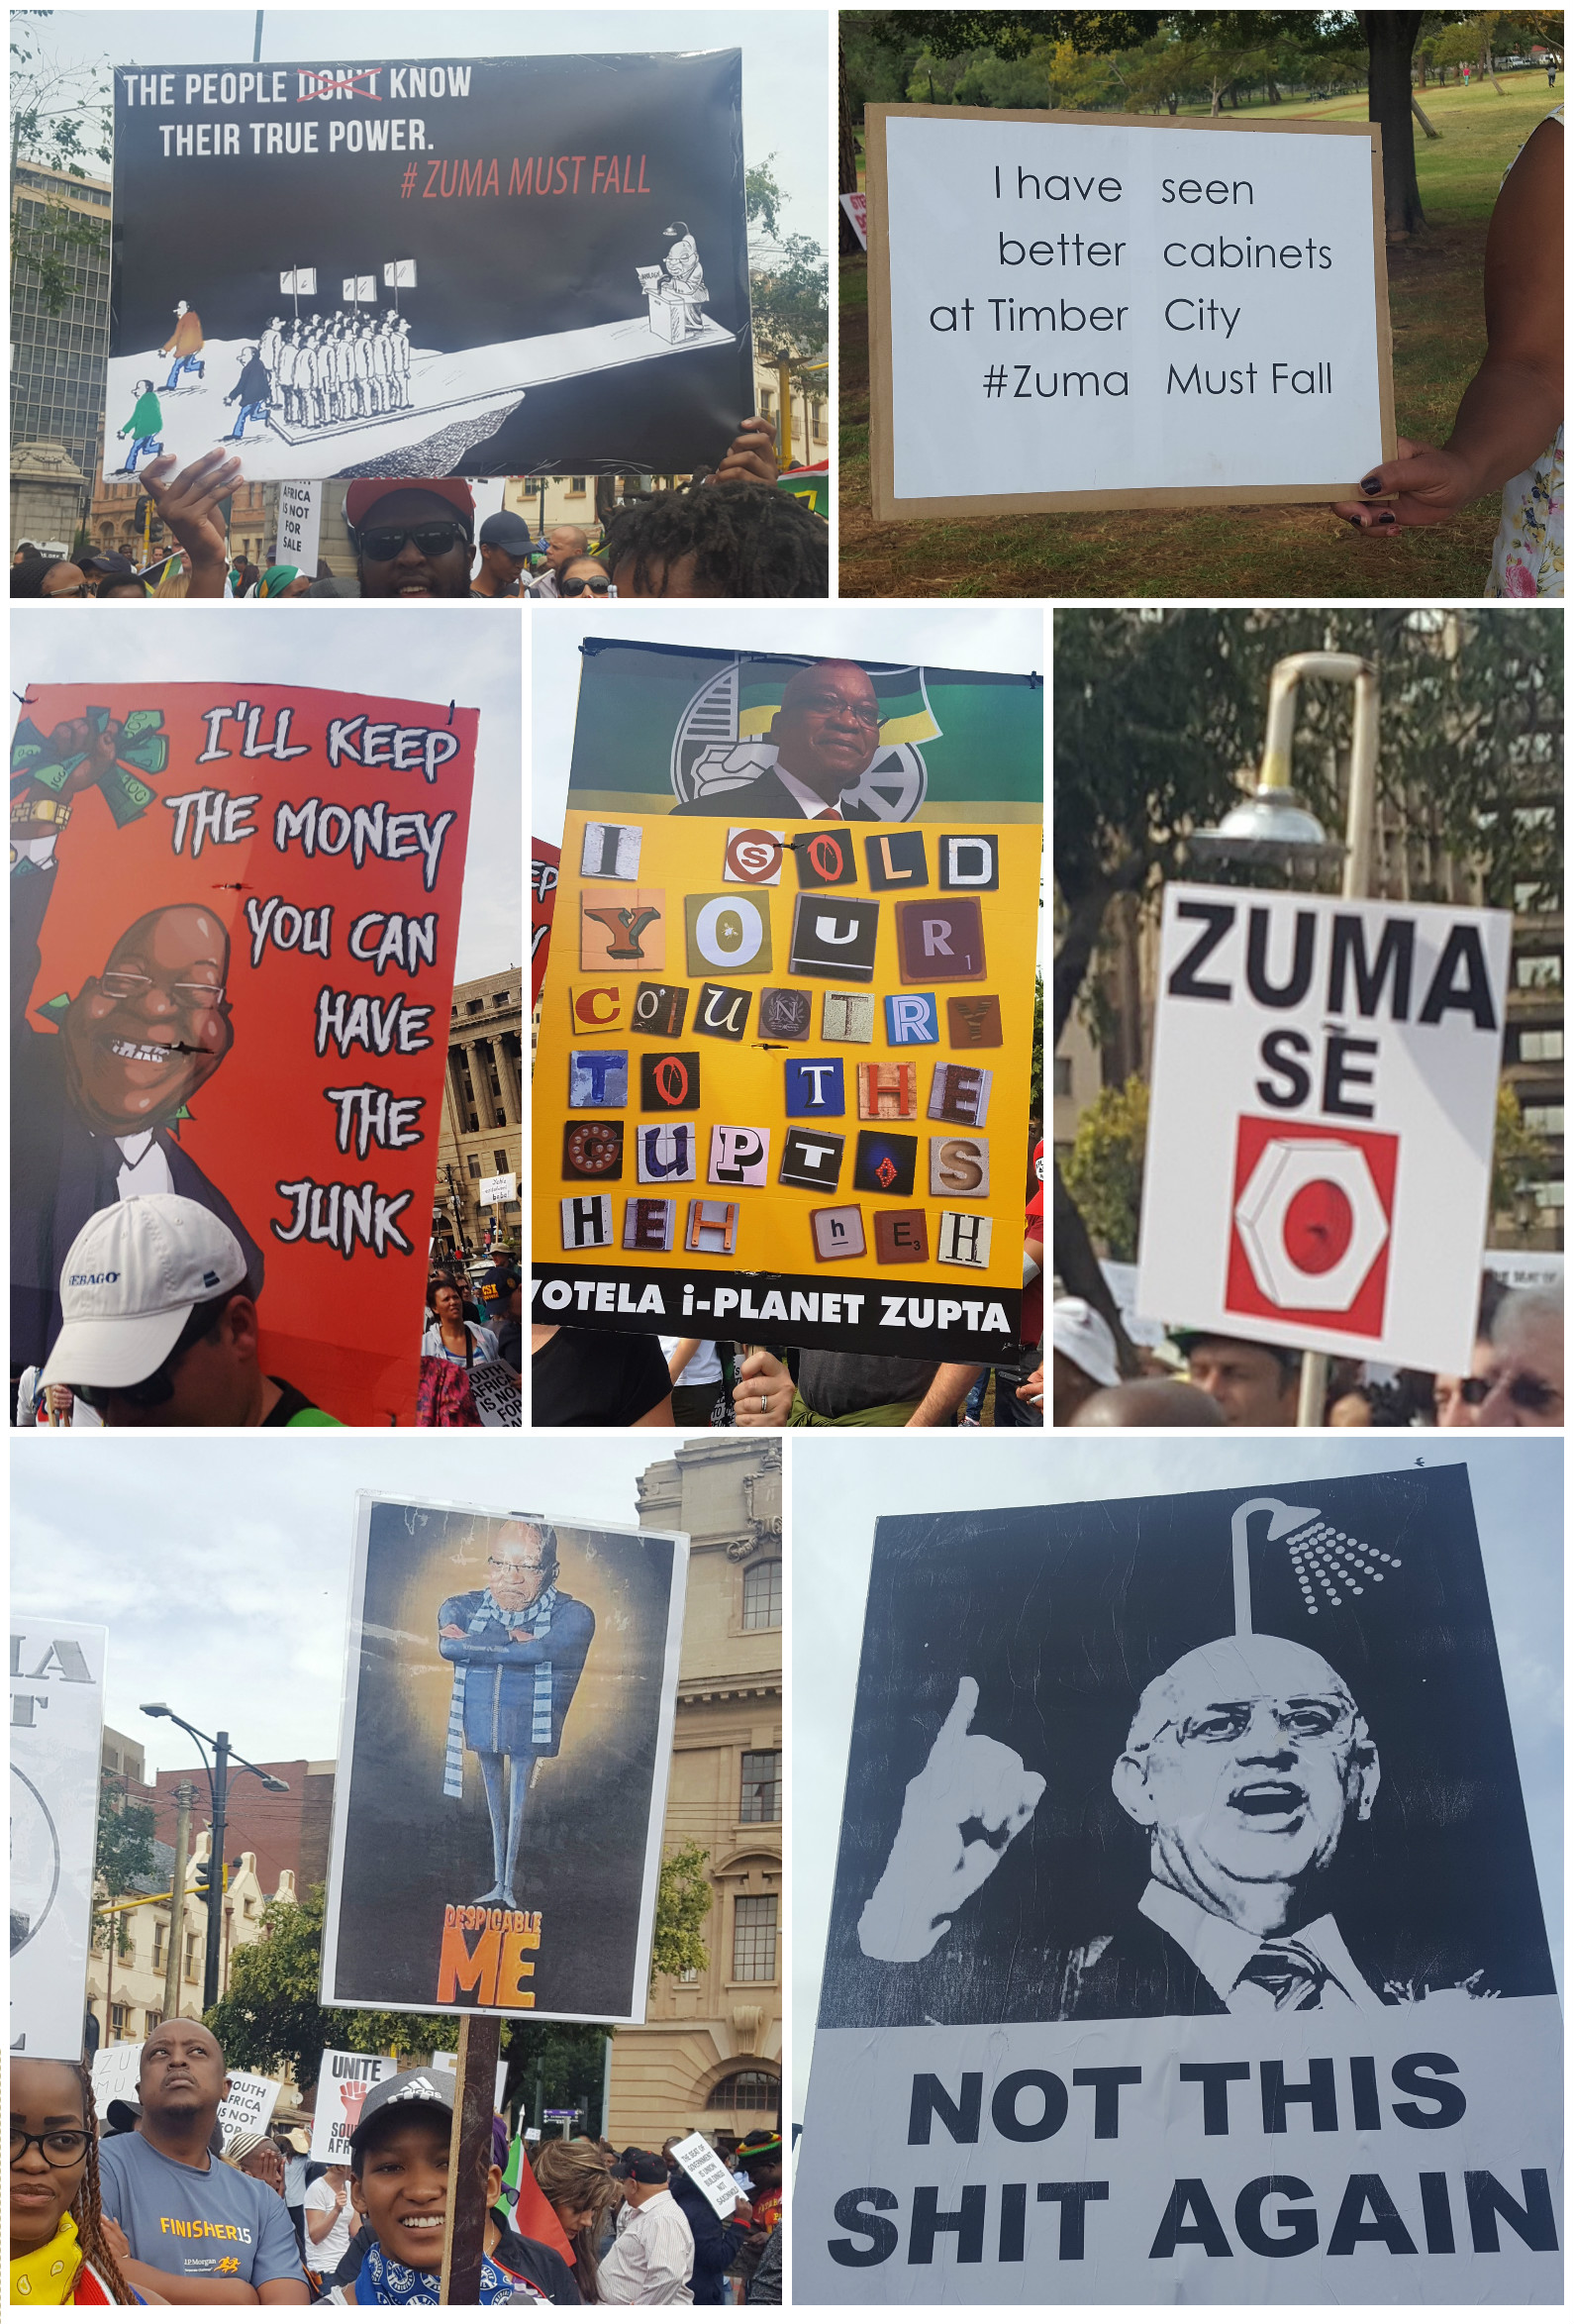 A collage of posters from the AntiZumaMarch which had humous elements